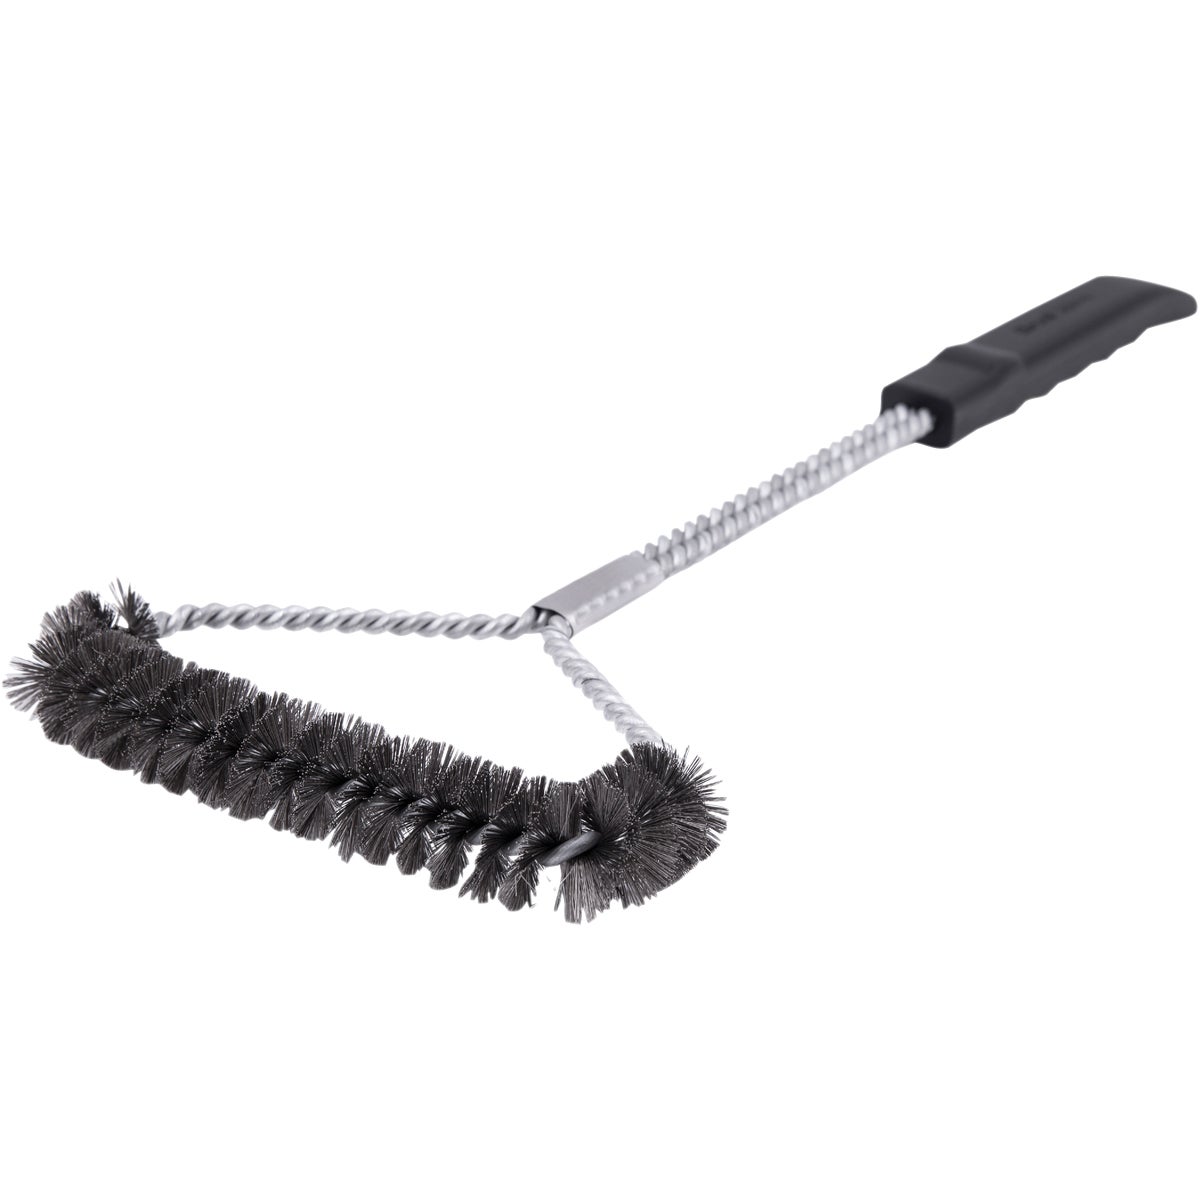 Broil King 18.9 In. Stainless Steel Bristles Tri-HeadGrill Cleaning Brush